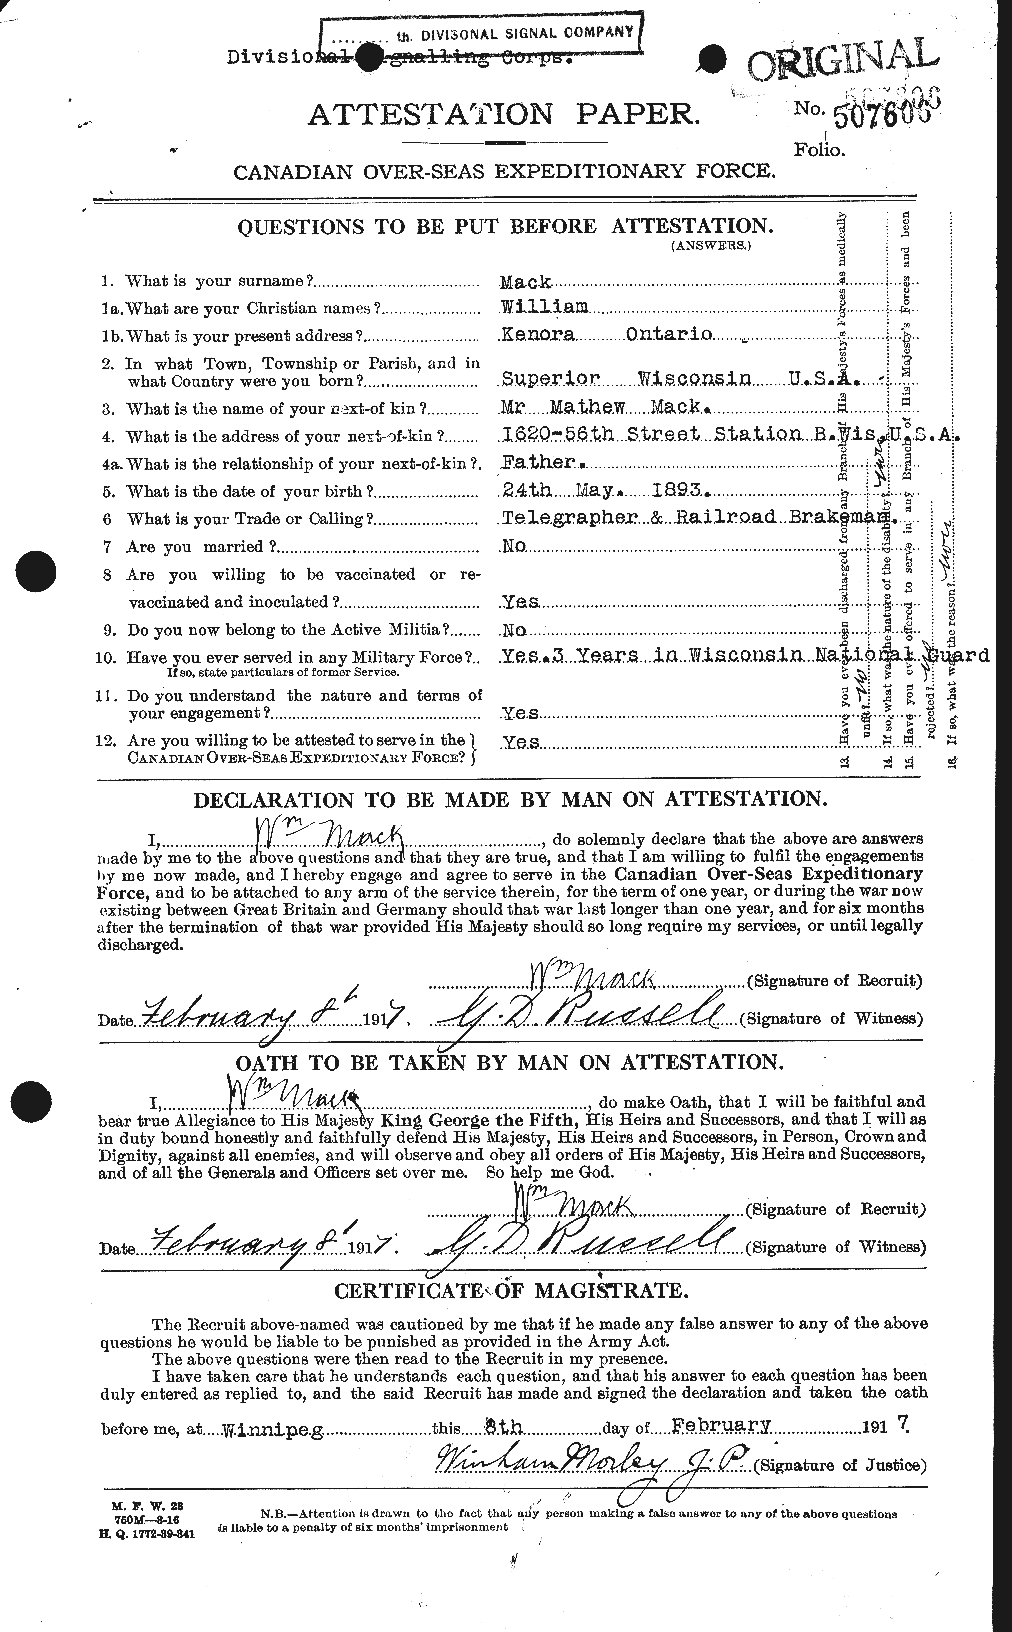 Personnel Records of the First World War - CEF 476198a